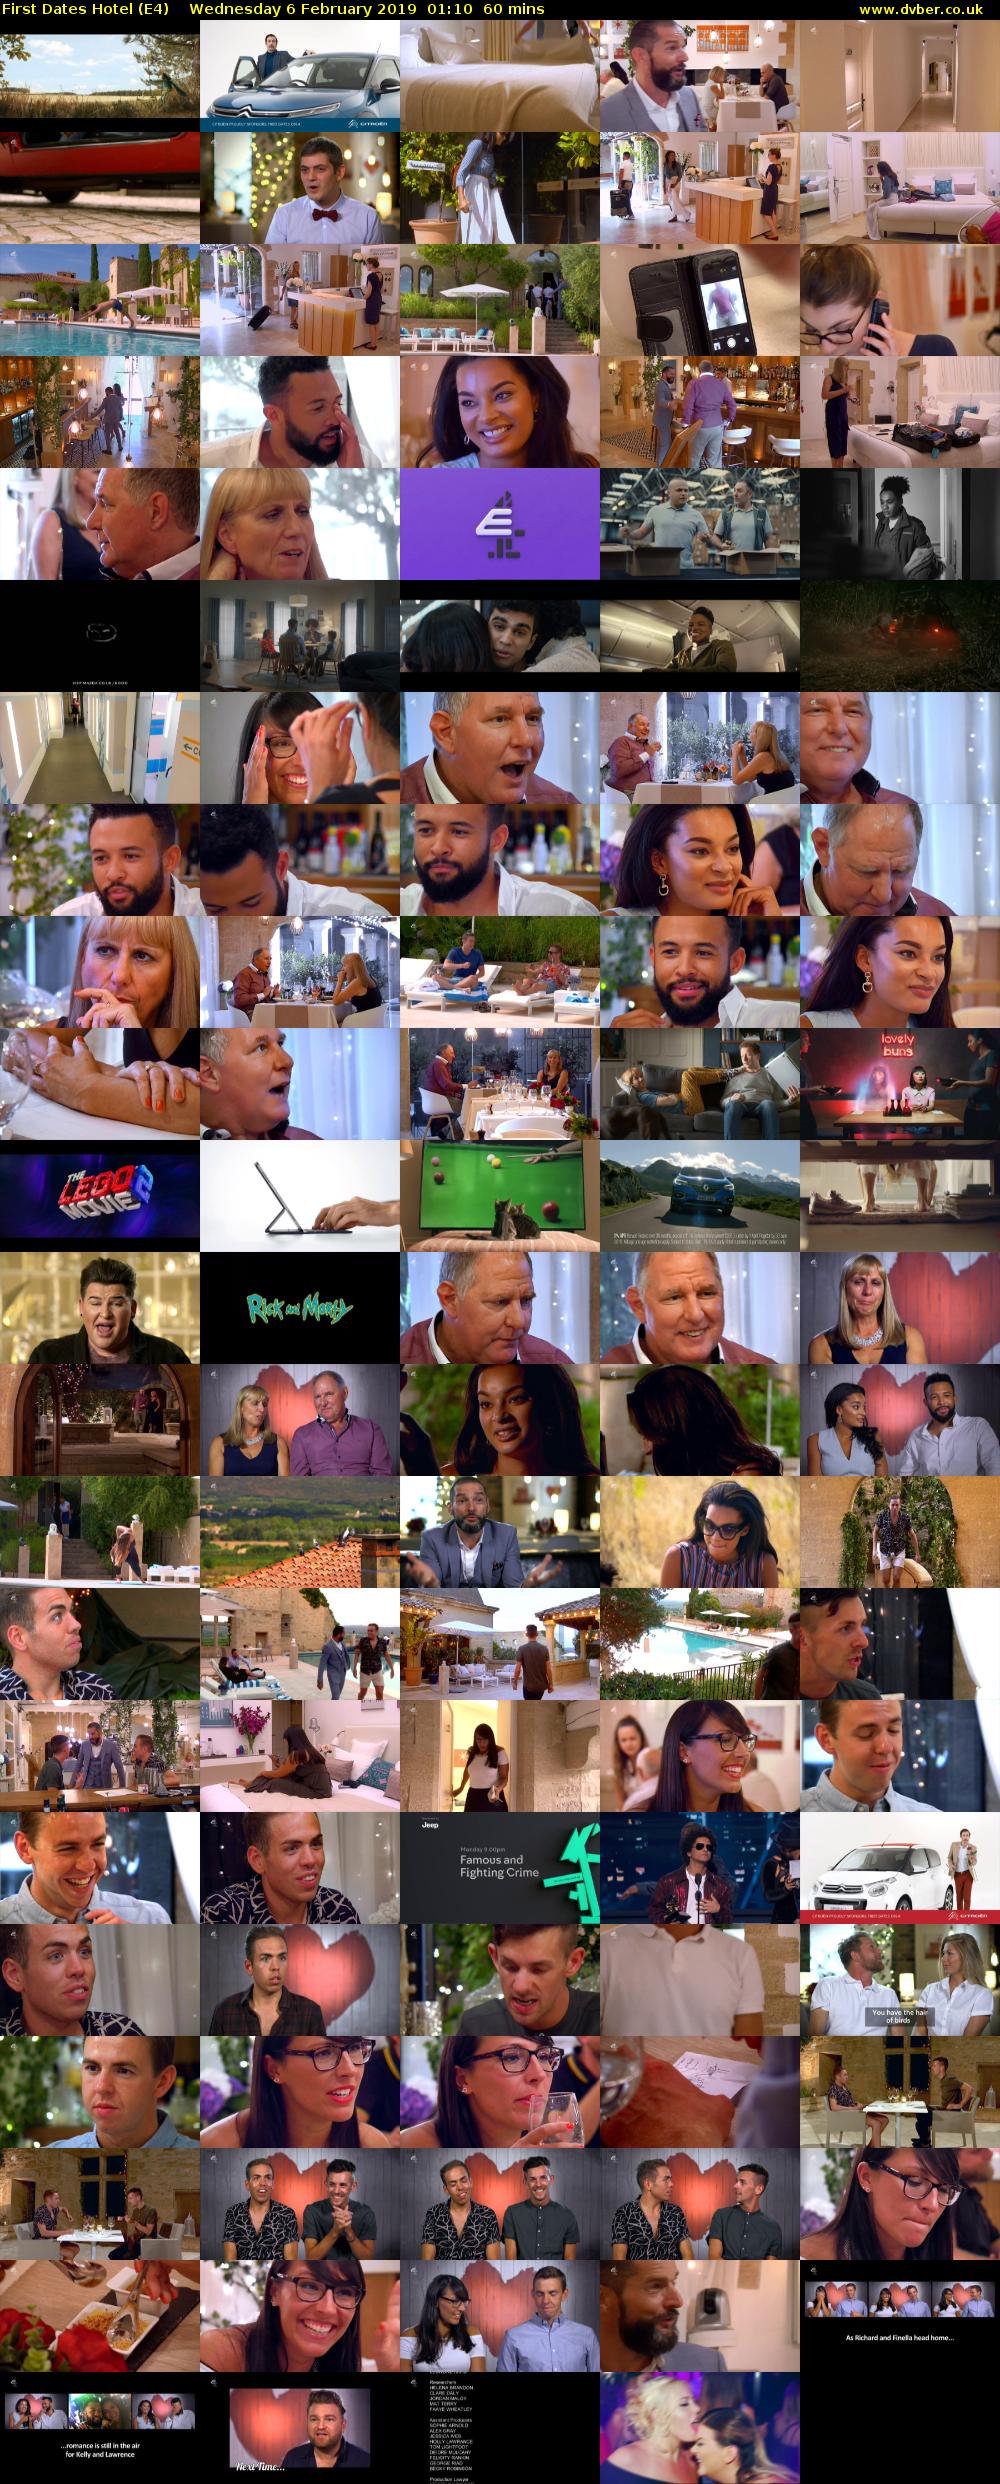 First Dates Hotel (E4) Wednesday 6 February 2019 01:10 - 02:10